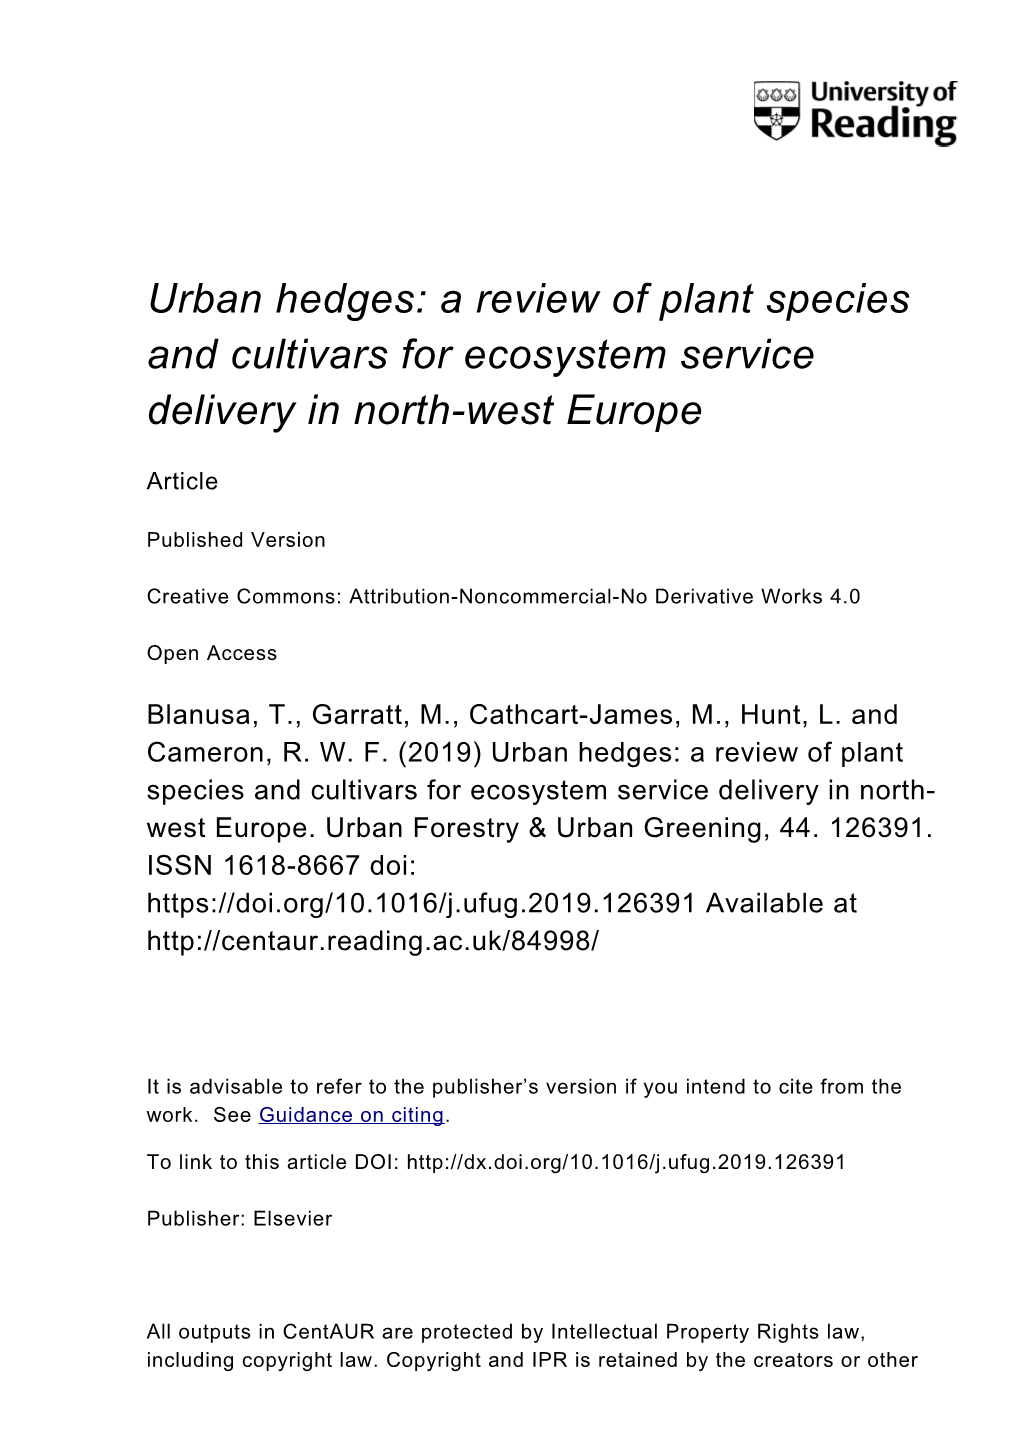 Urban Hedges a Review of Plant Species and Cultivars for Ecosystem Service Delivery in North-West Europe